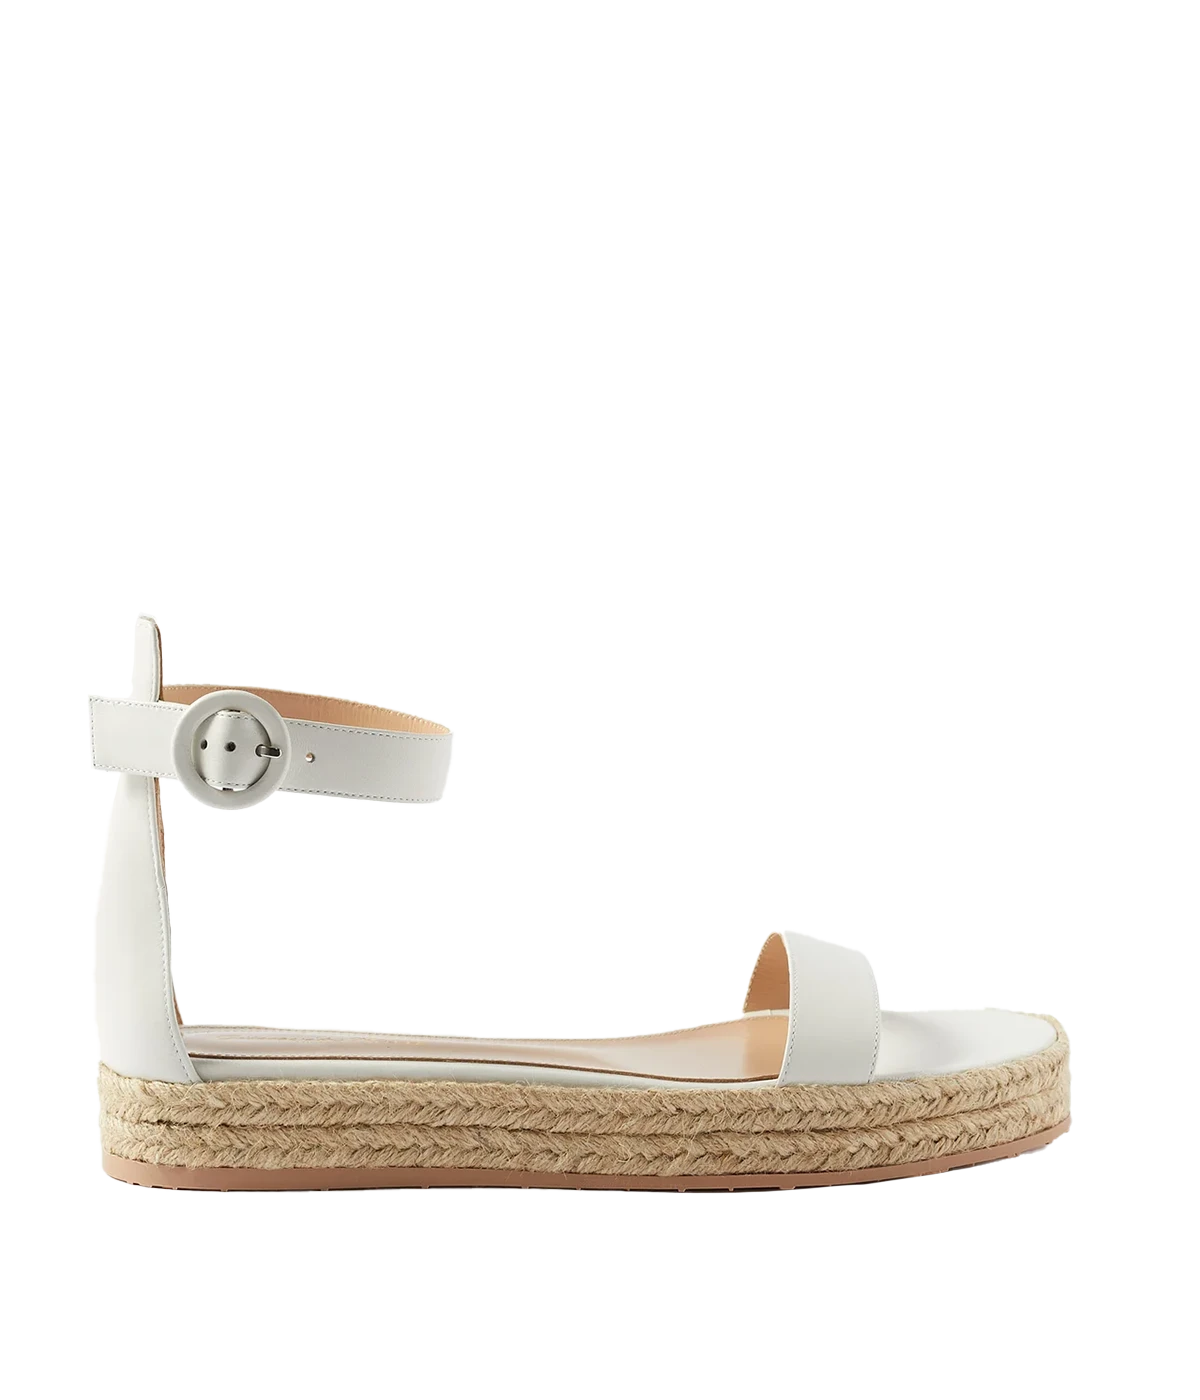 Image  Image of a flat espradrilles style sandal, featruring a smooth white leather ankle and toe strap and braided espadrilles sole..